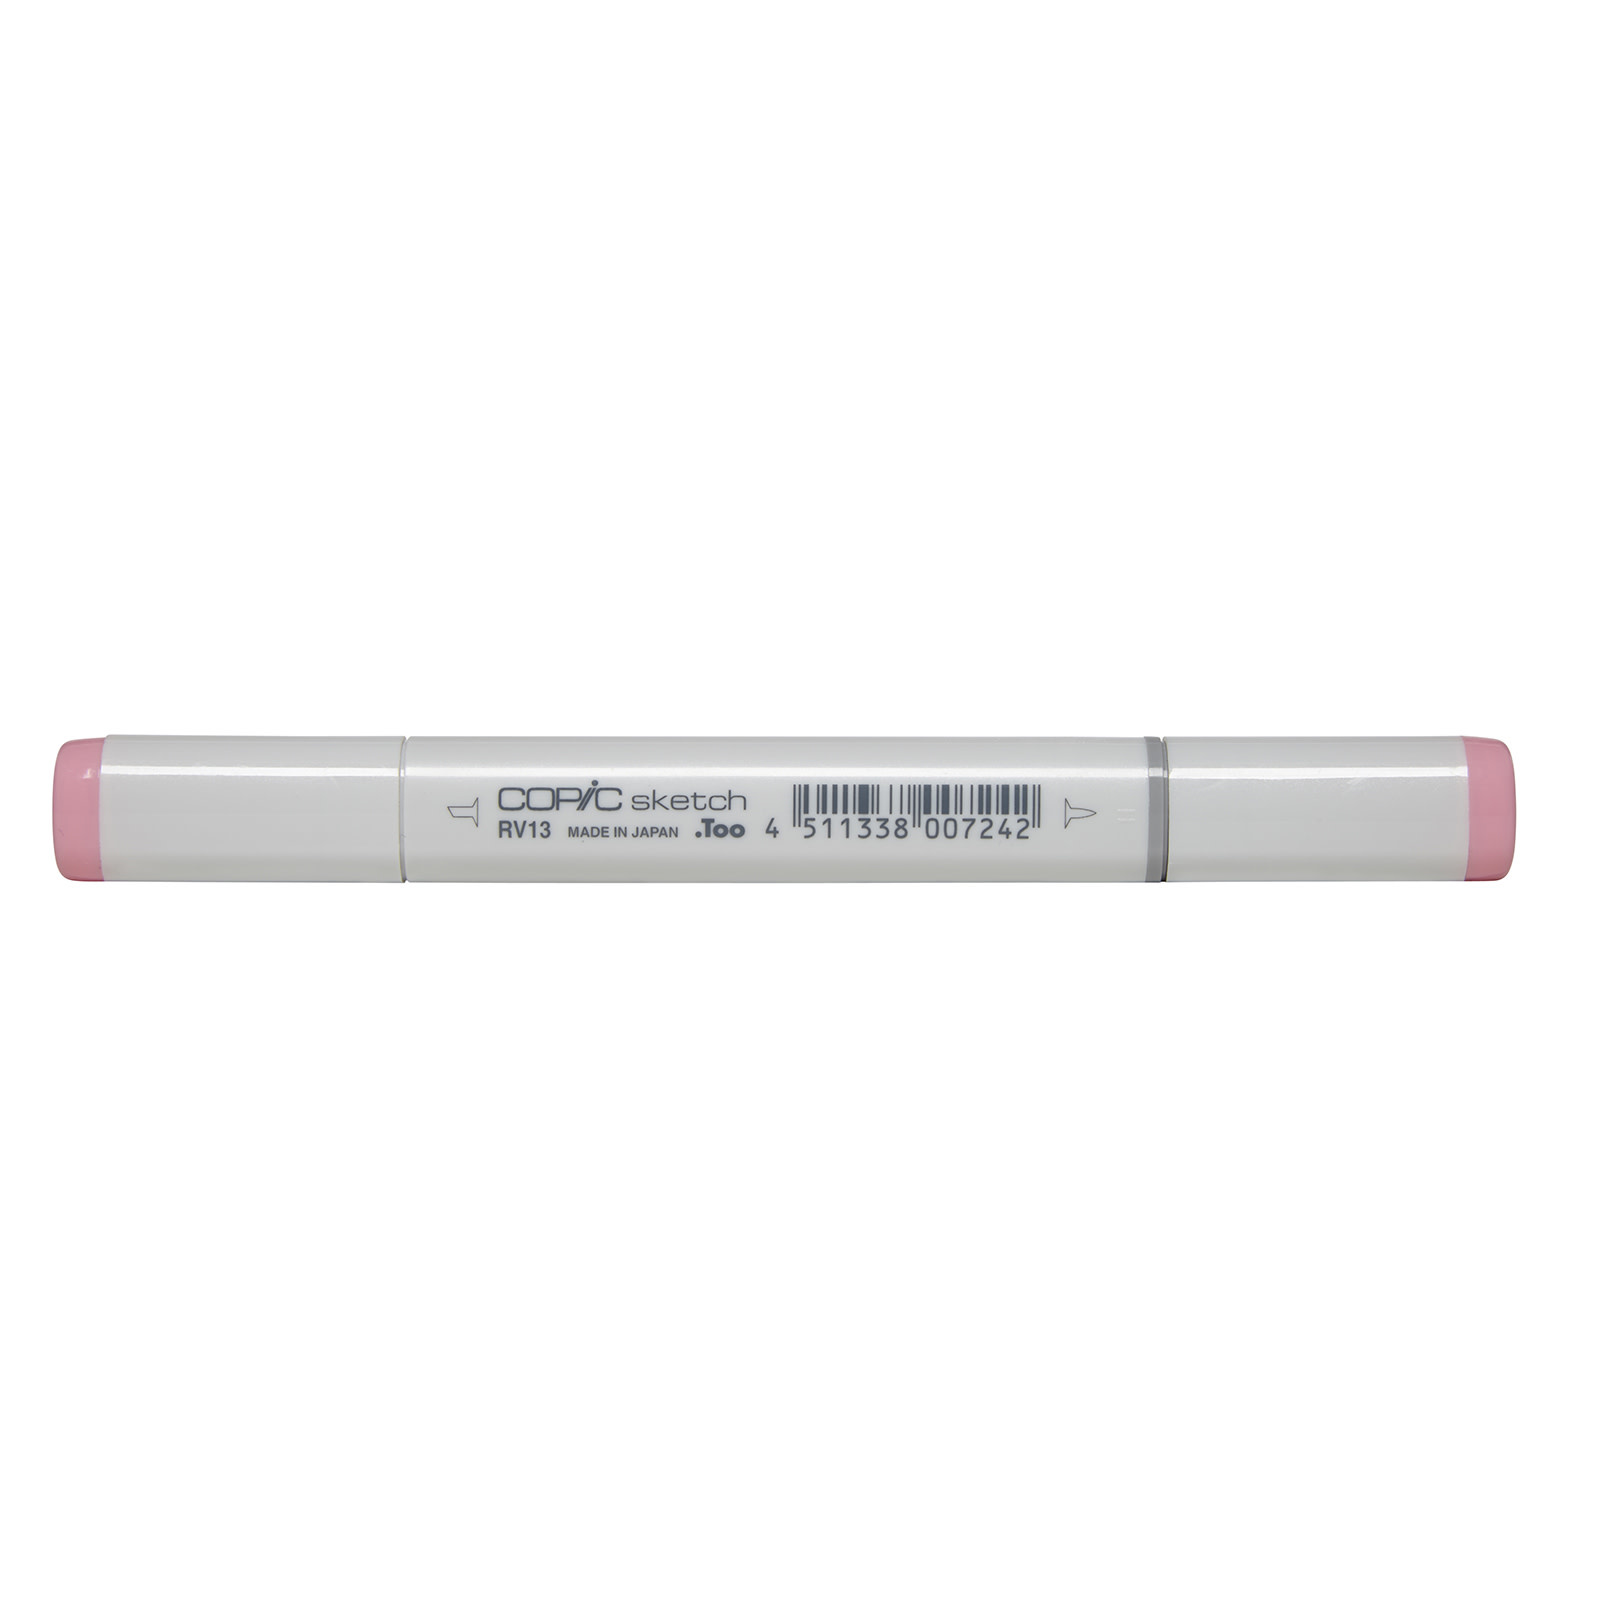 COPIC Marker Tender Pink 